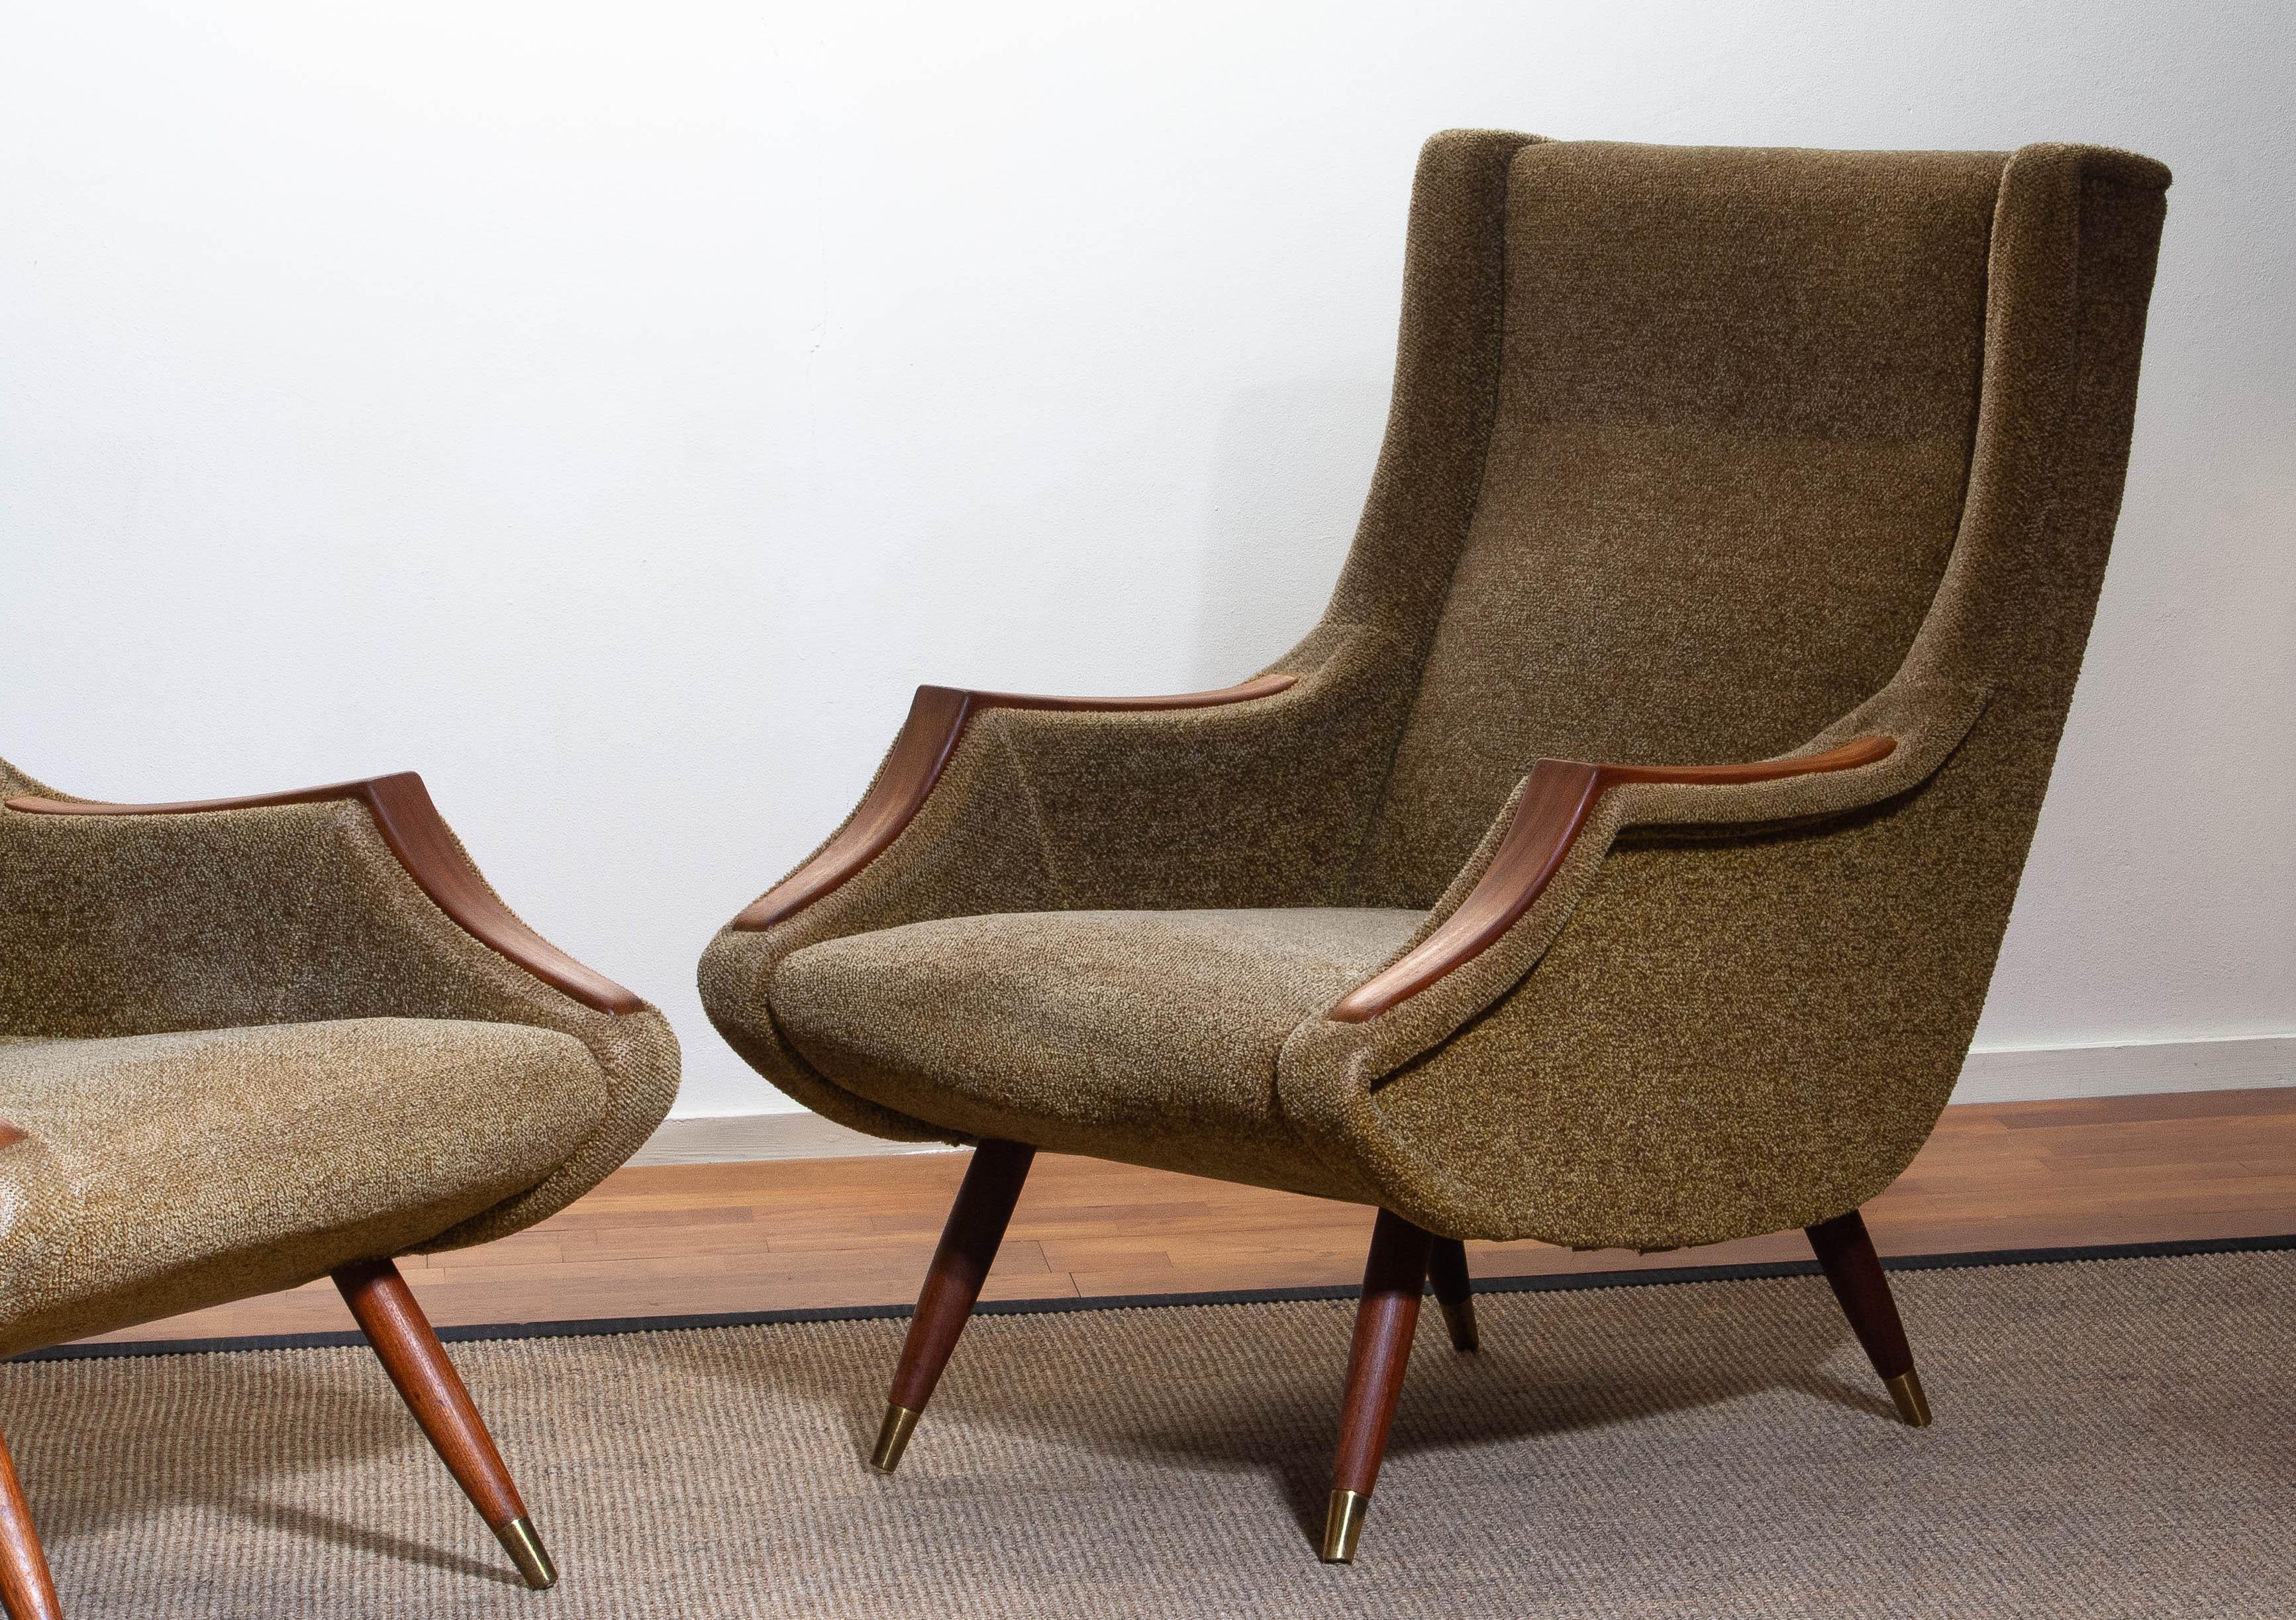 Mid-20th Century Set Italian Lounge / Easy Chairs from the 1950s by Aldo Morbelli for Isa Bergamo